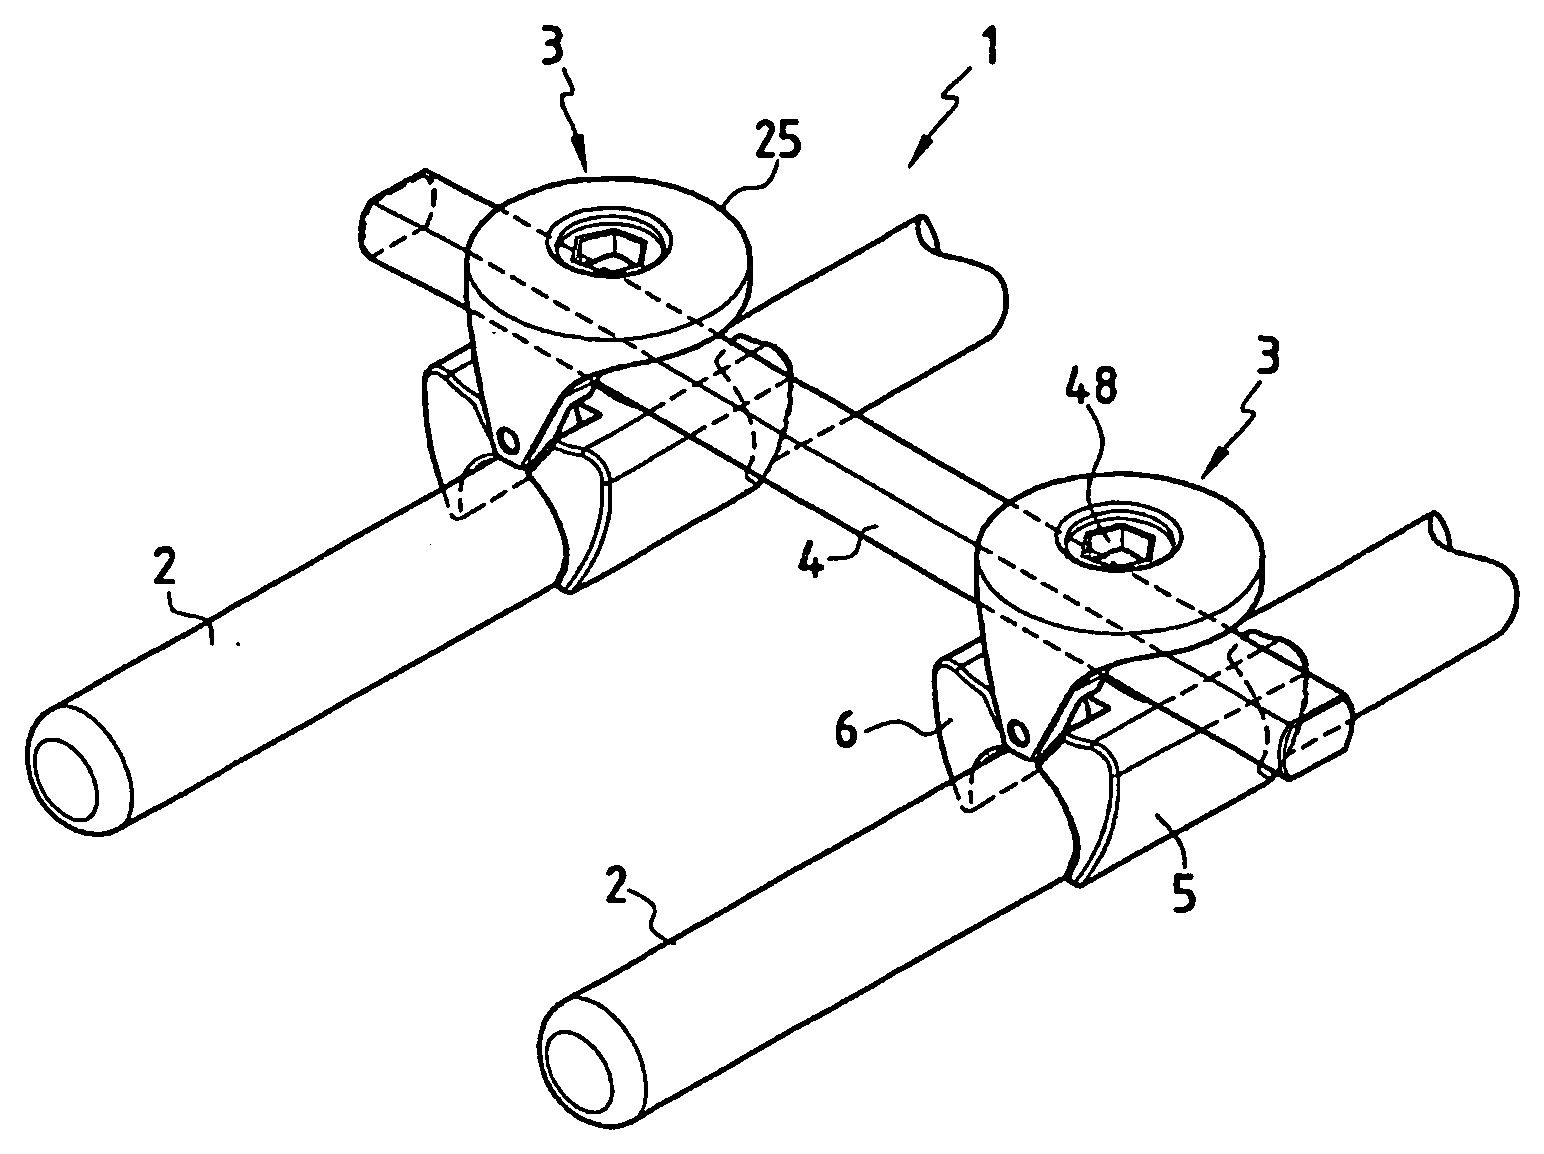 Connection system between a spinal rod and a transverse bar